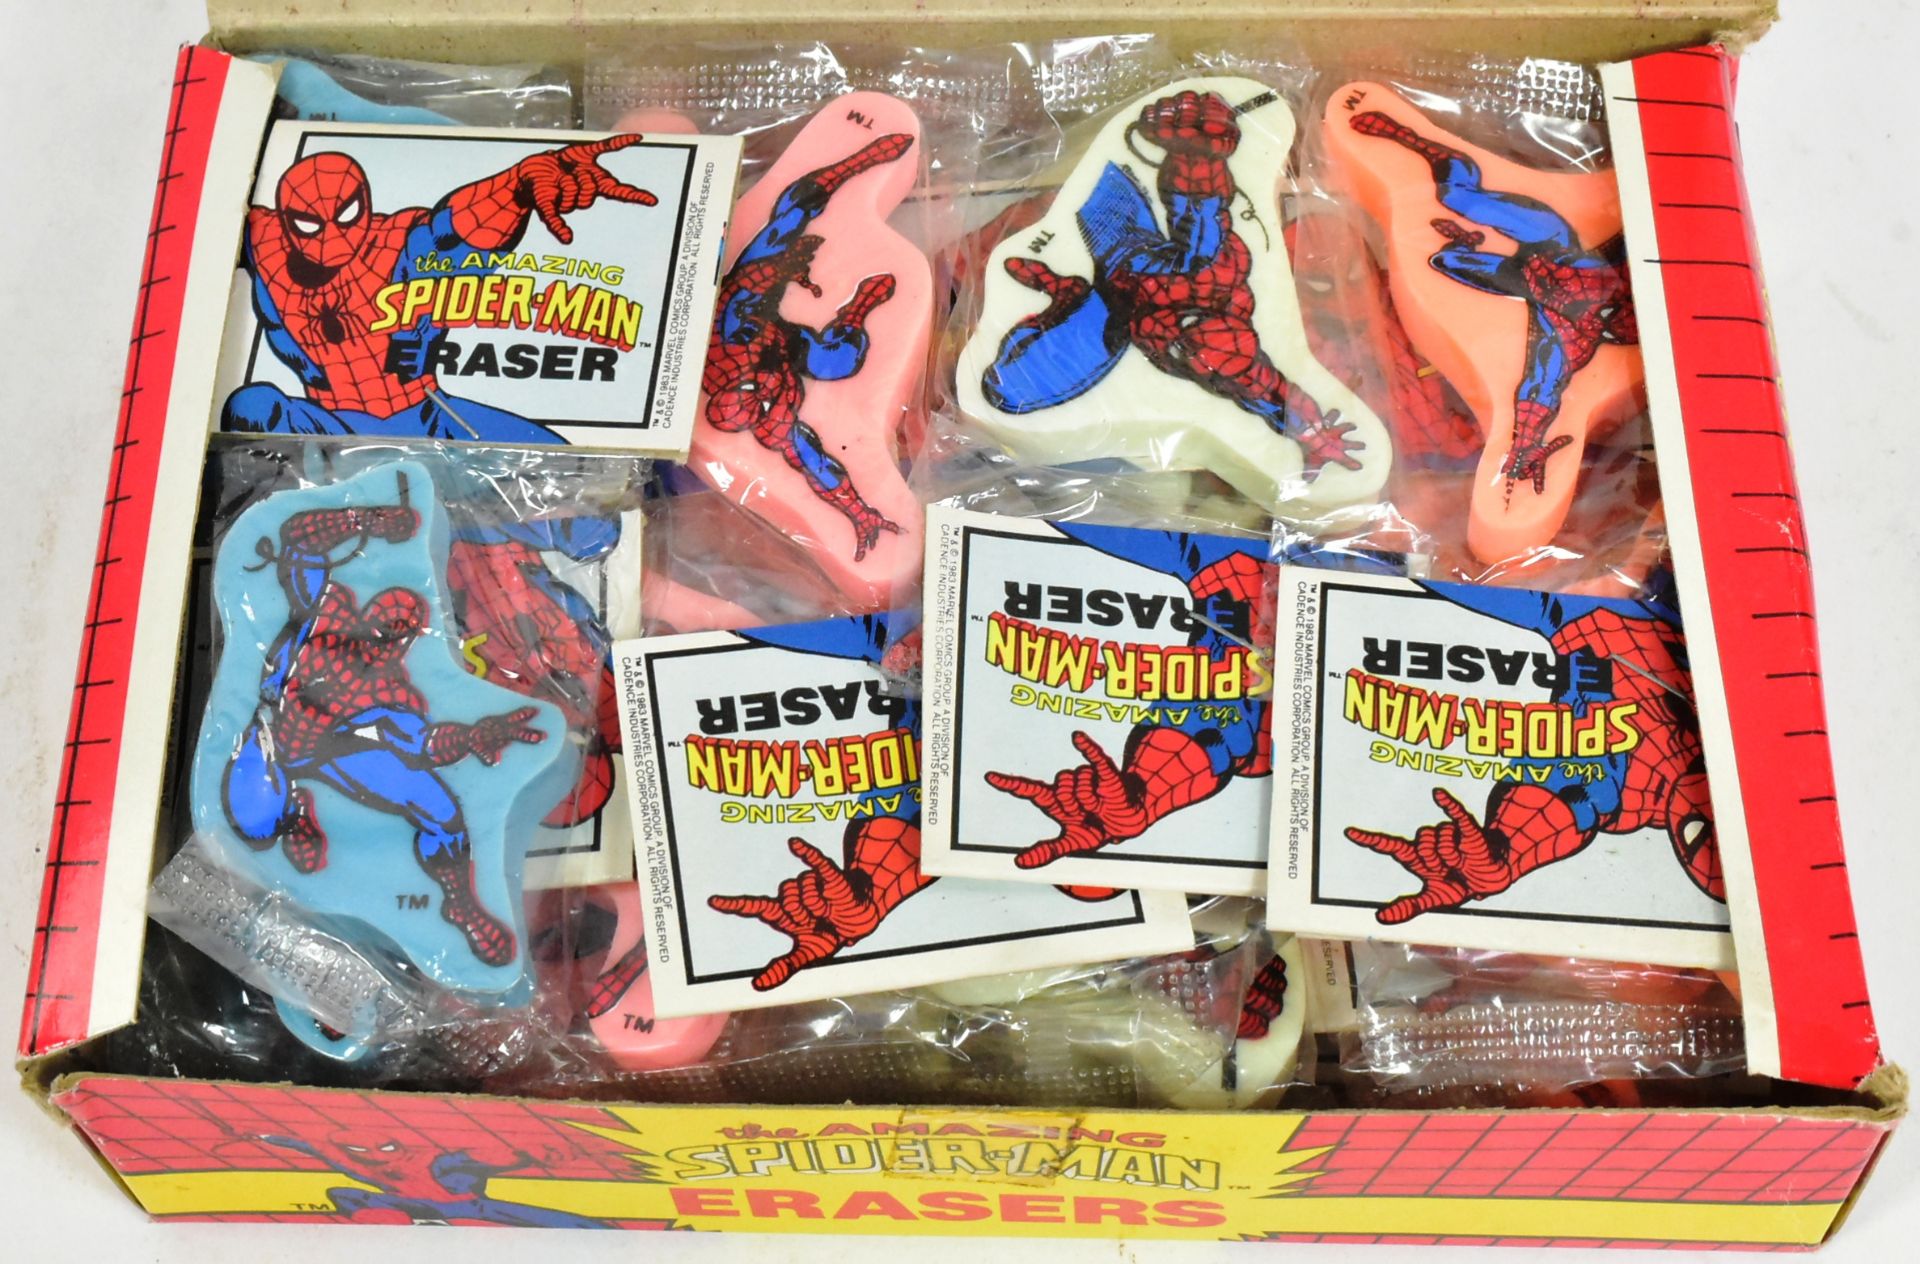 SPIDER MAN - VINTAGE COUNTER TOP DISPLAY BOXES - SPIDERMAN ERASERS - Image 2 of 3